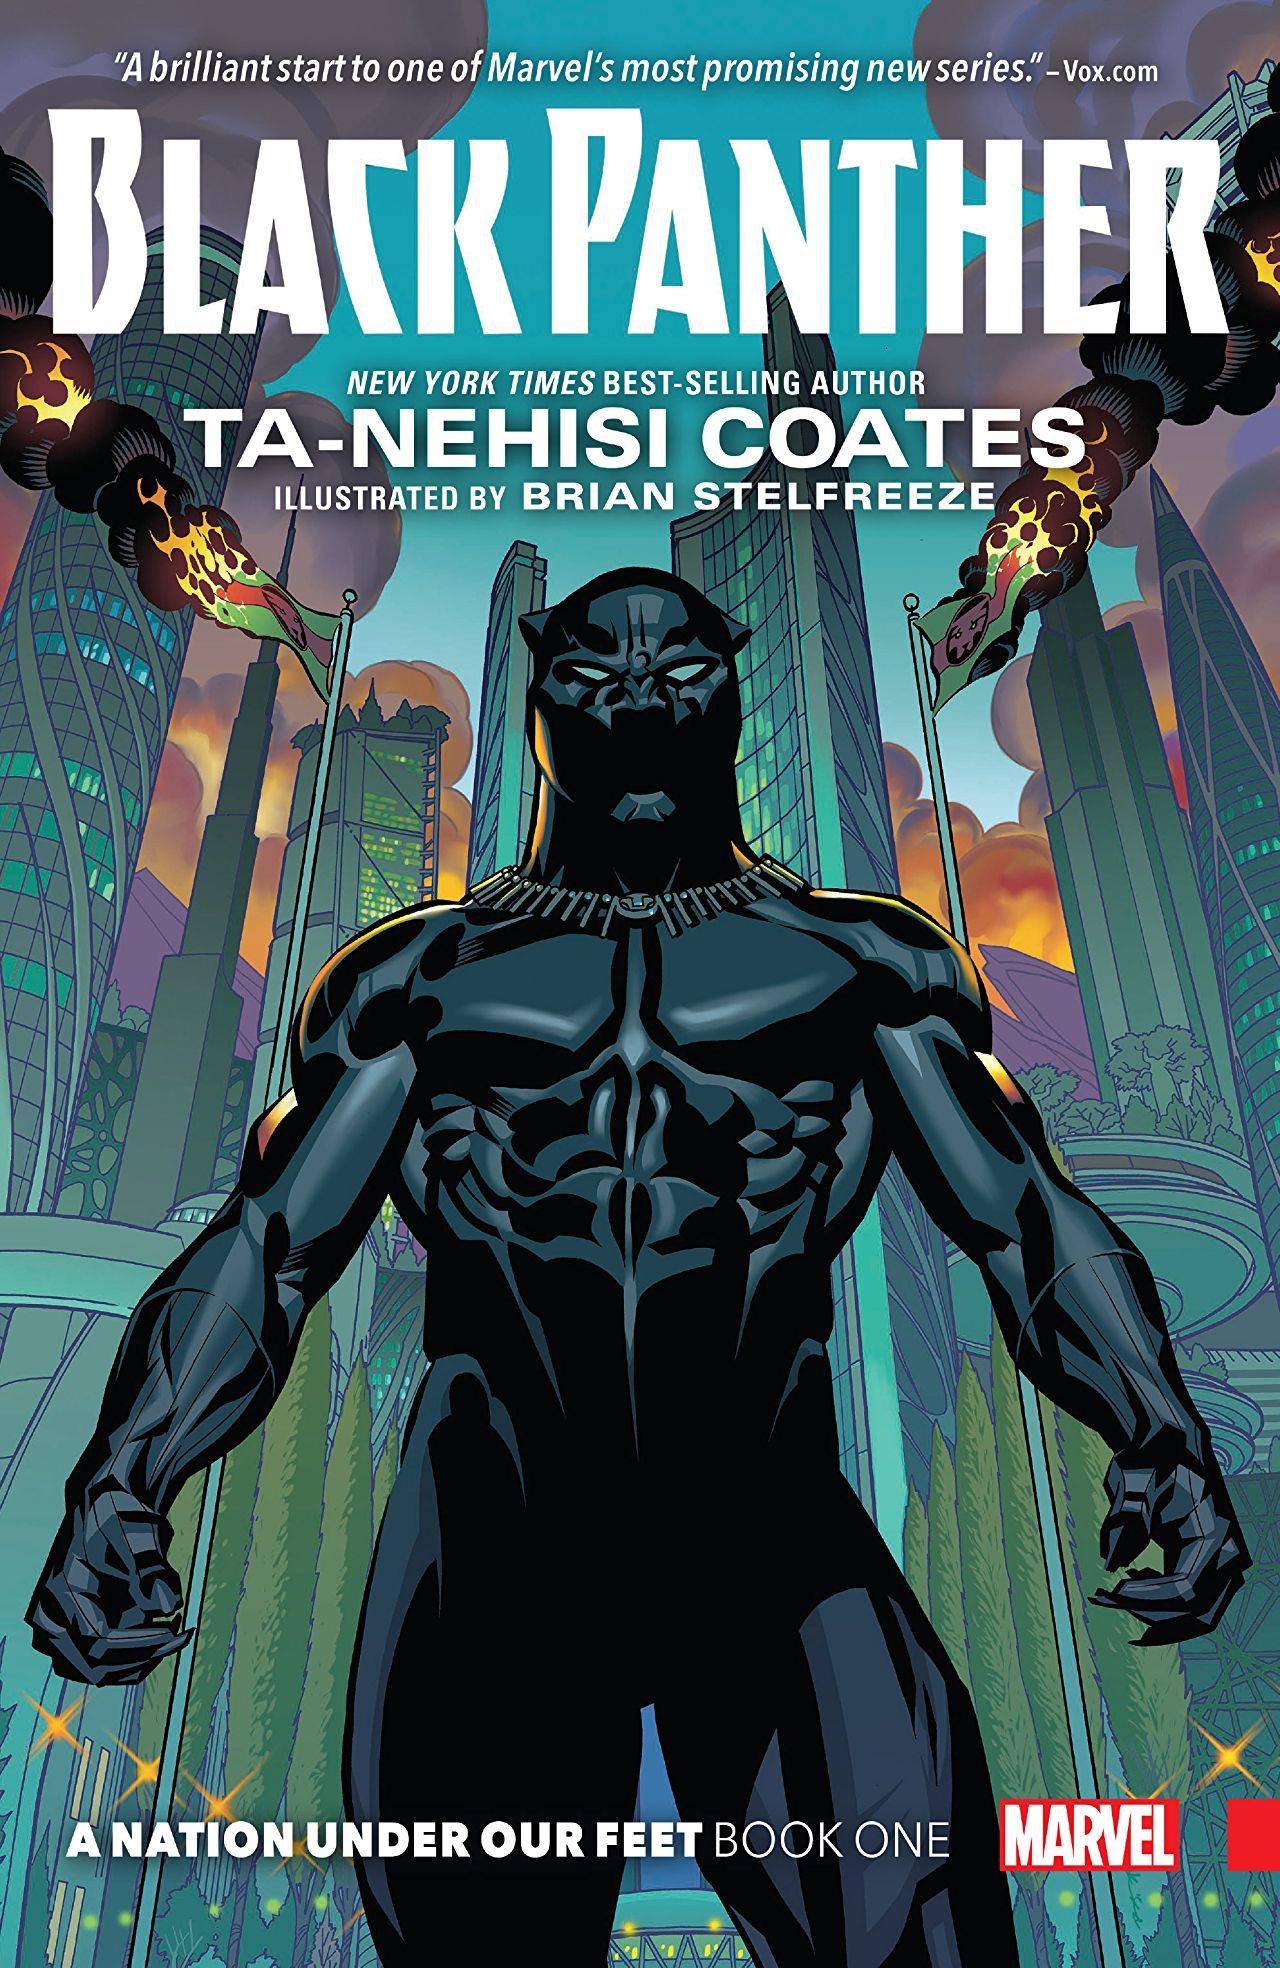 Black Panther, Vol. 1: A Nation Under Our Feet by Ta-Nehisi Coates